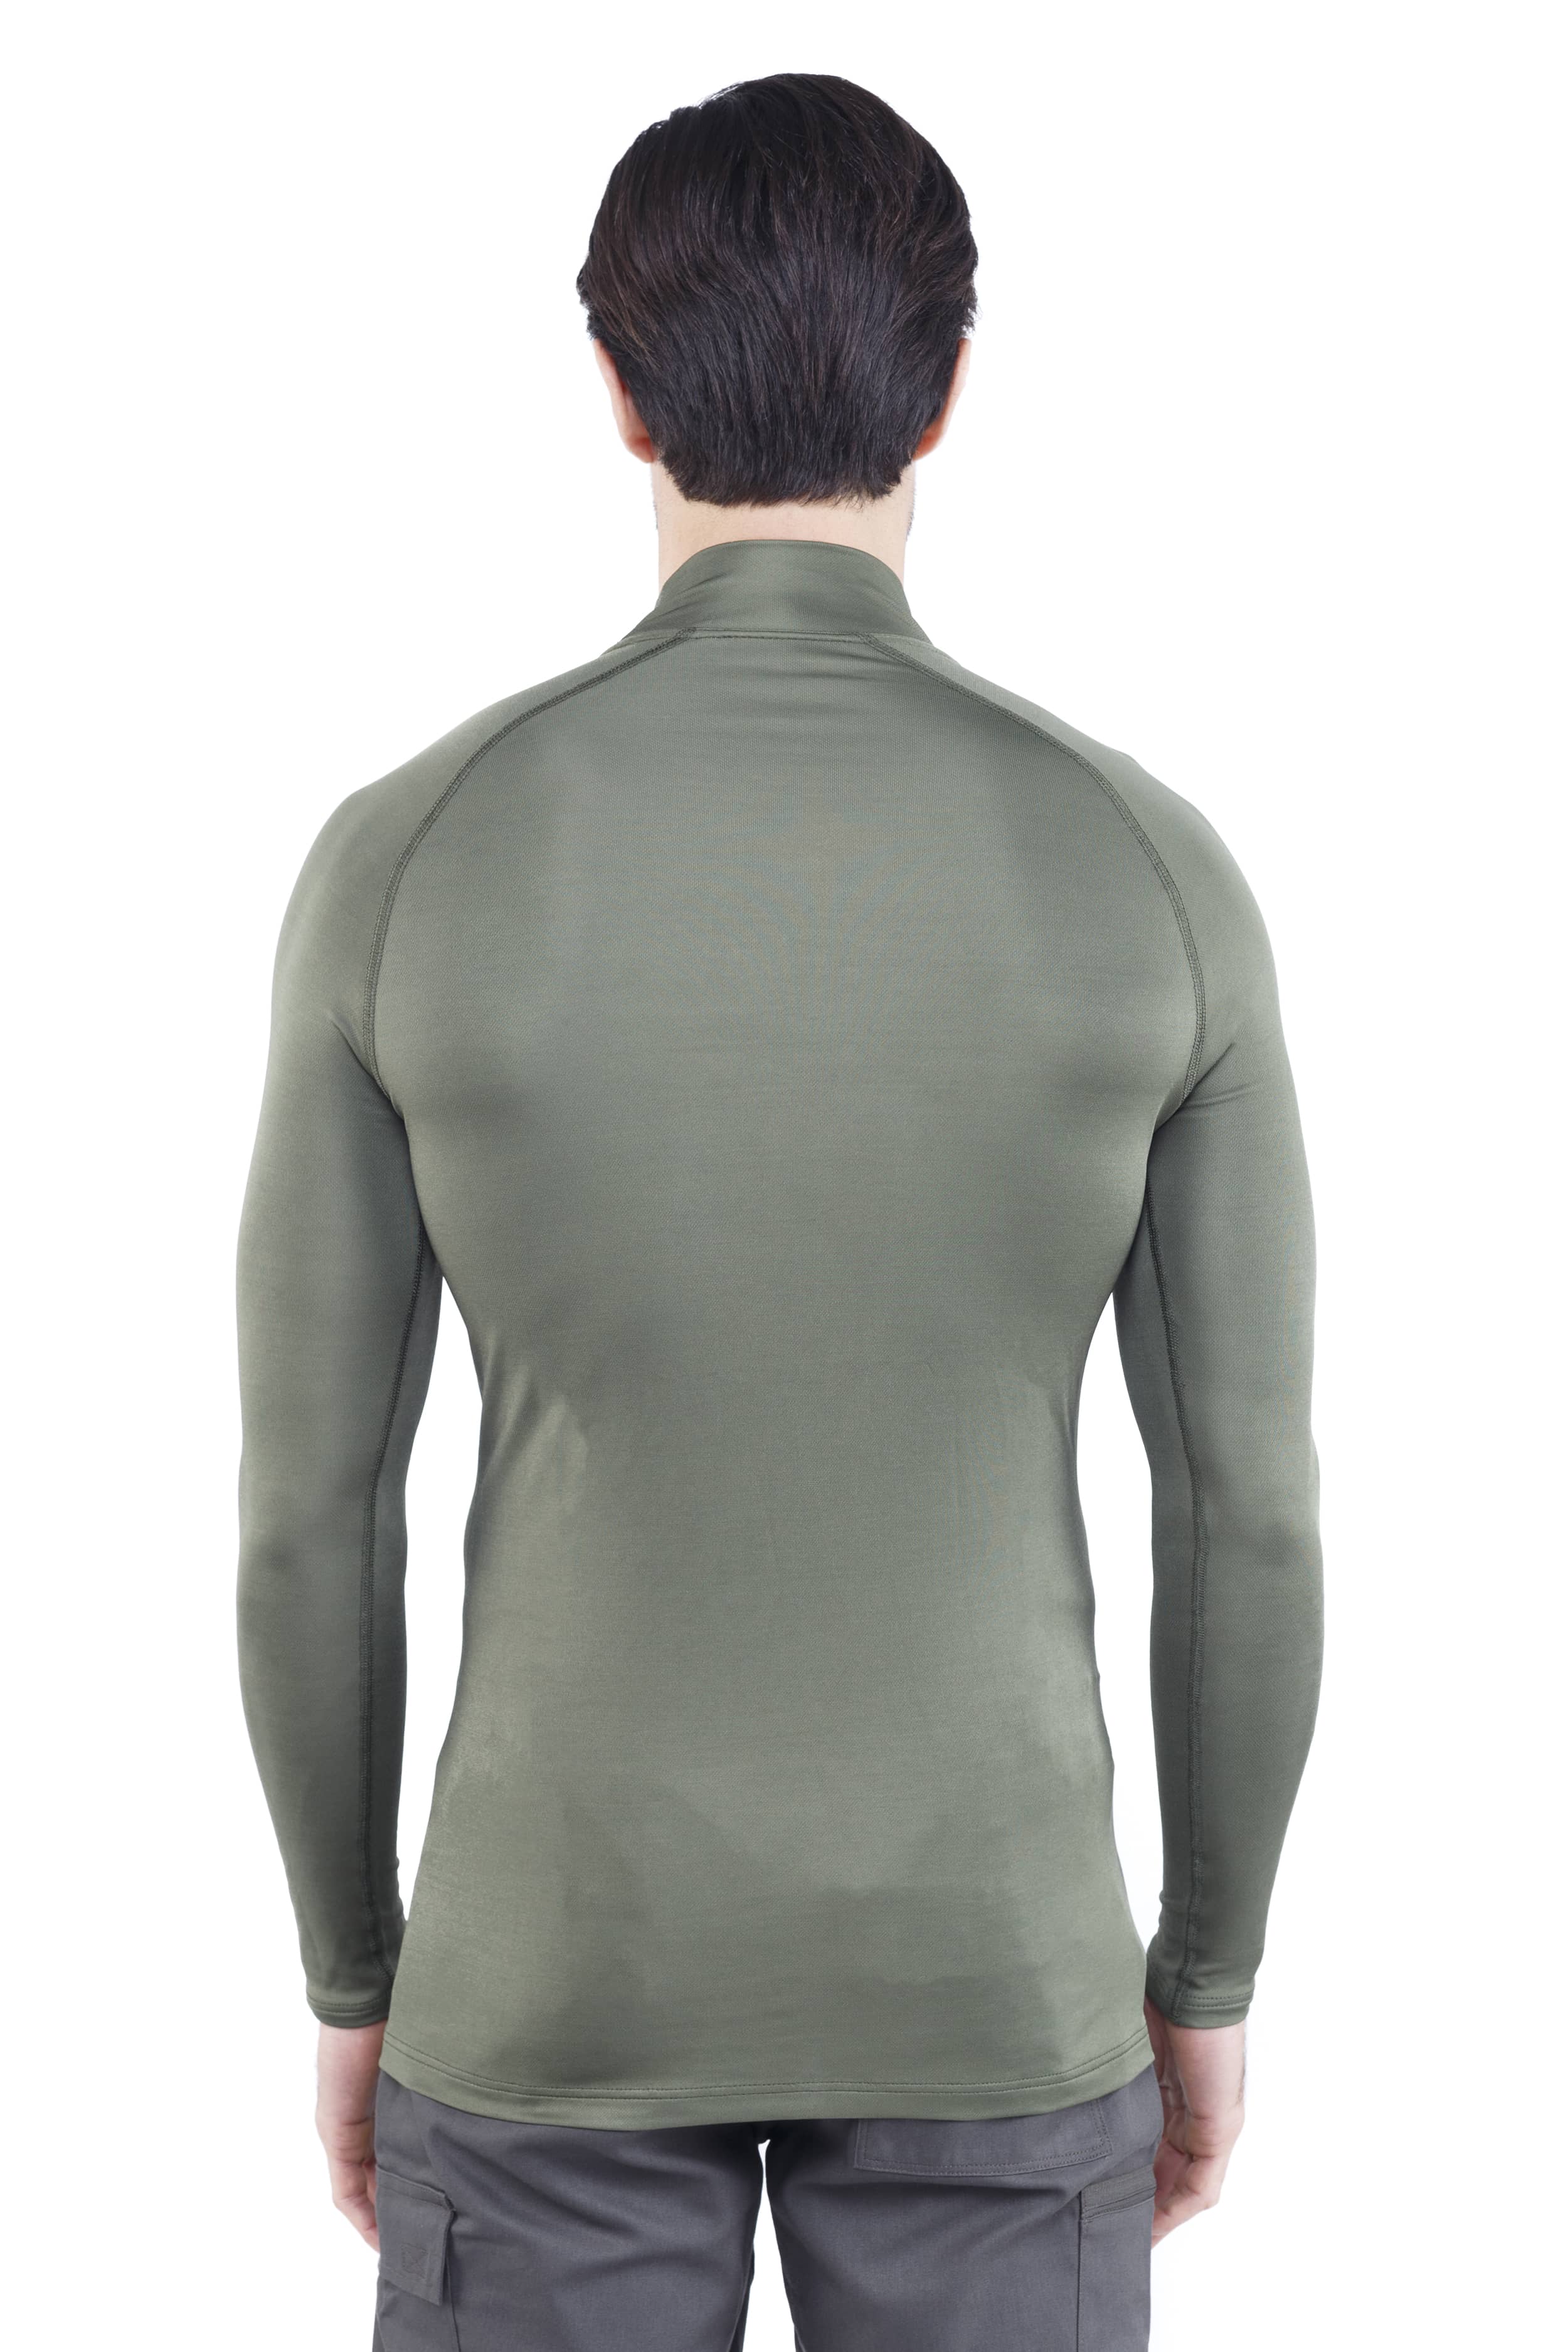 ARMY FIREPROOF THERMAL COMBAT SHIRT